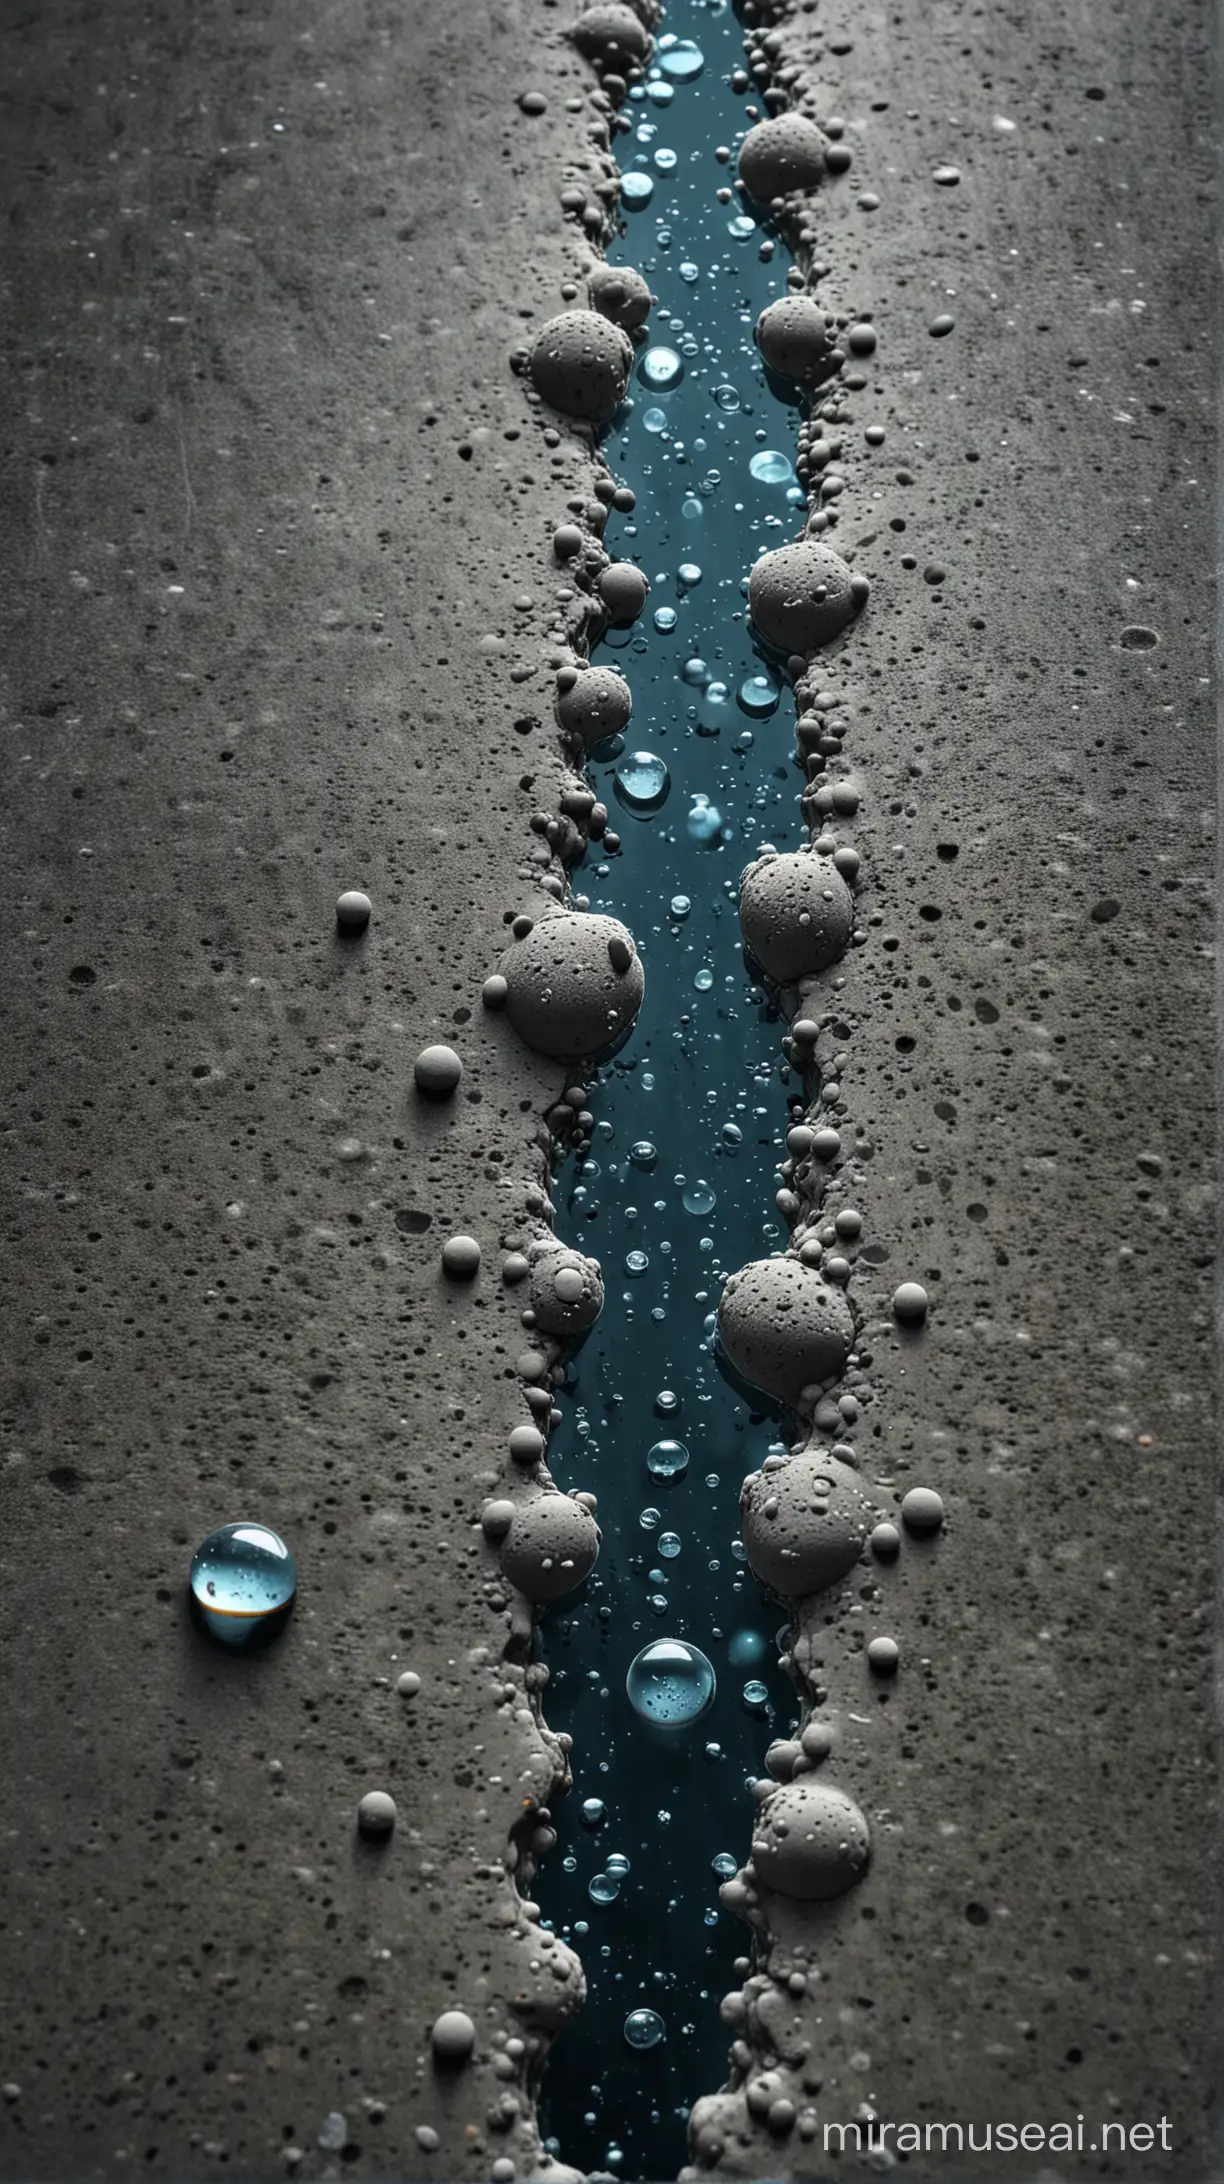 "Illustration of microscopic bacteria, stylized and glowing, awakening within the crevices of concrete as water droplets make contact."